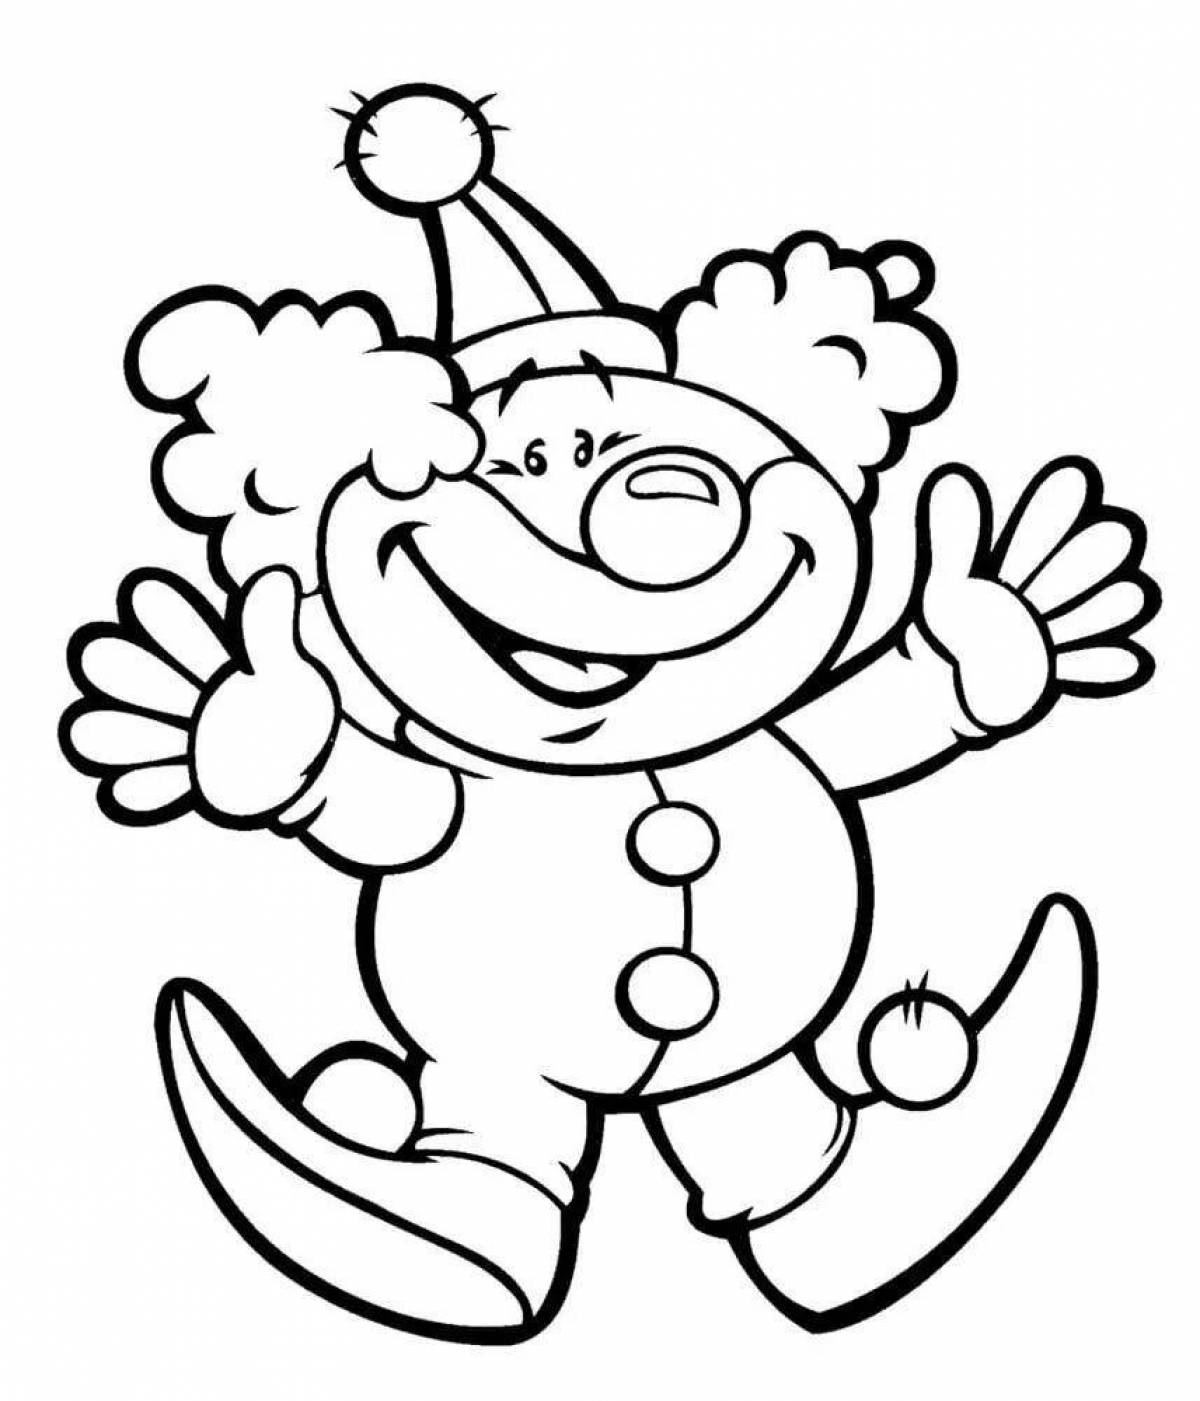 Drawing of a smiling clown